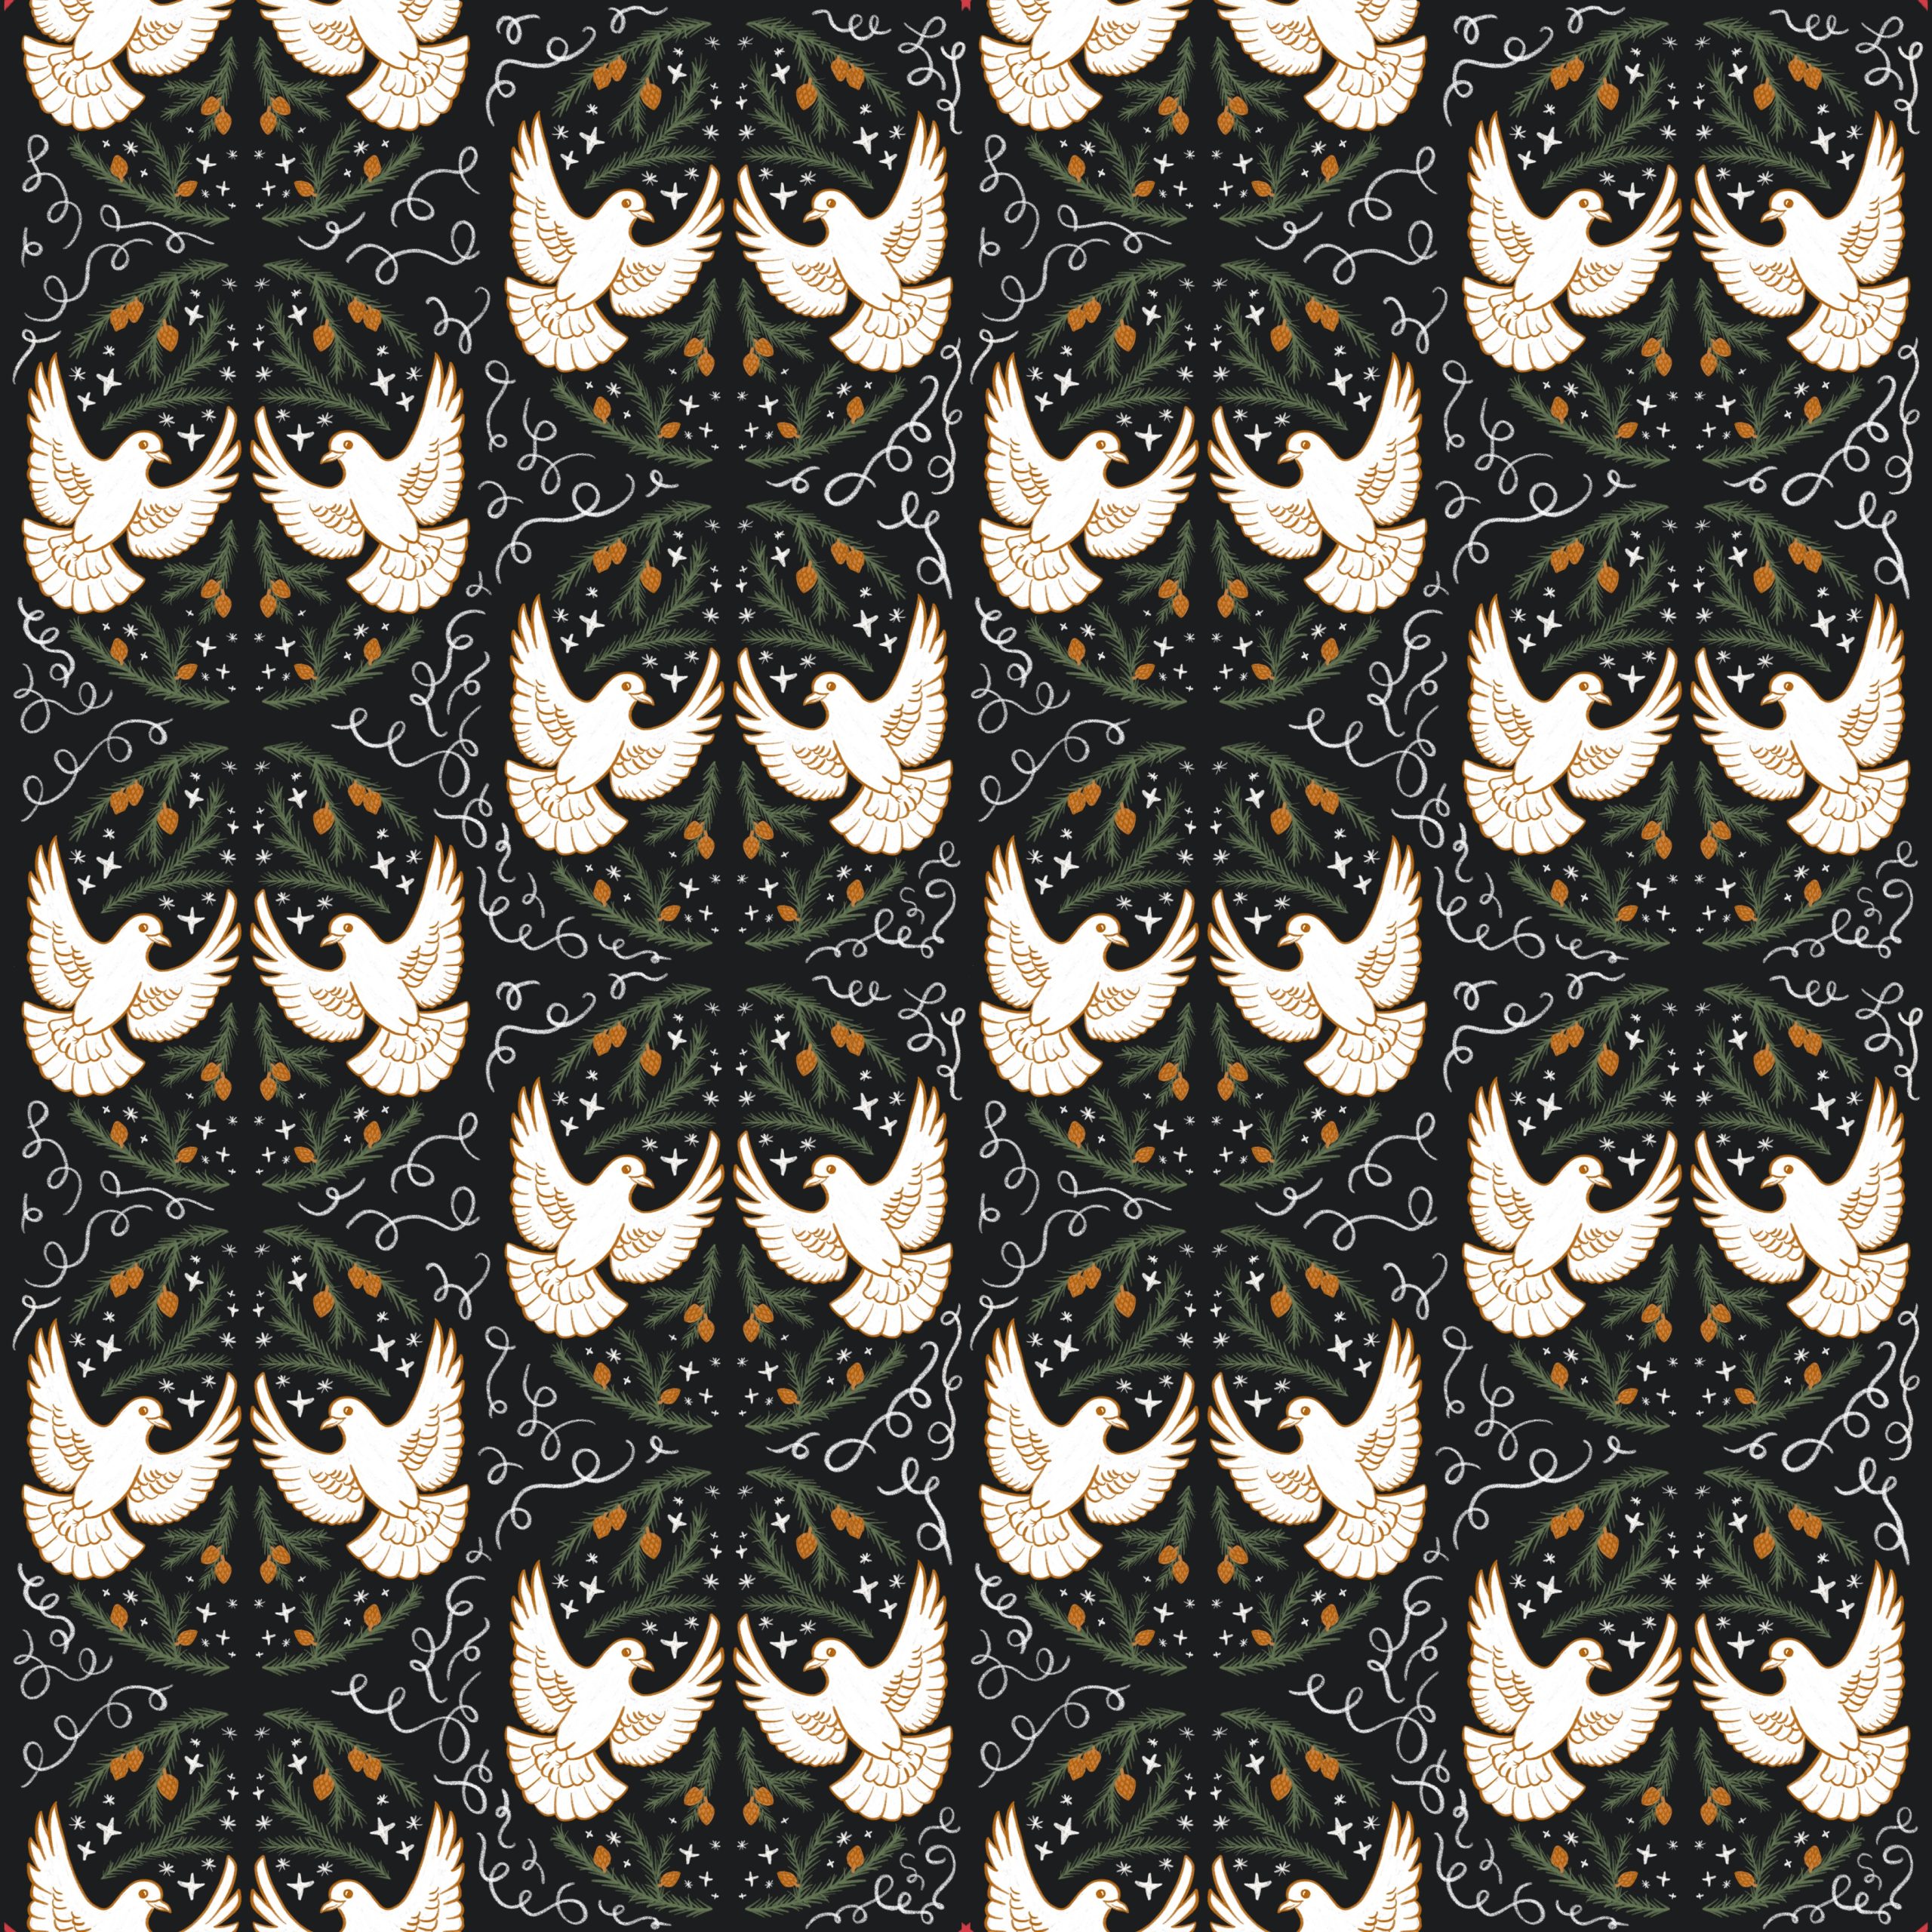 A half-drop pattern with two white digitally drawn doves in a circle with pine twigs and small pine cones on a dark background.